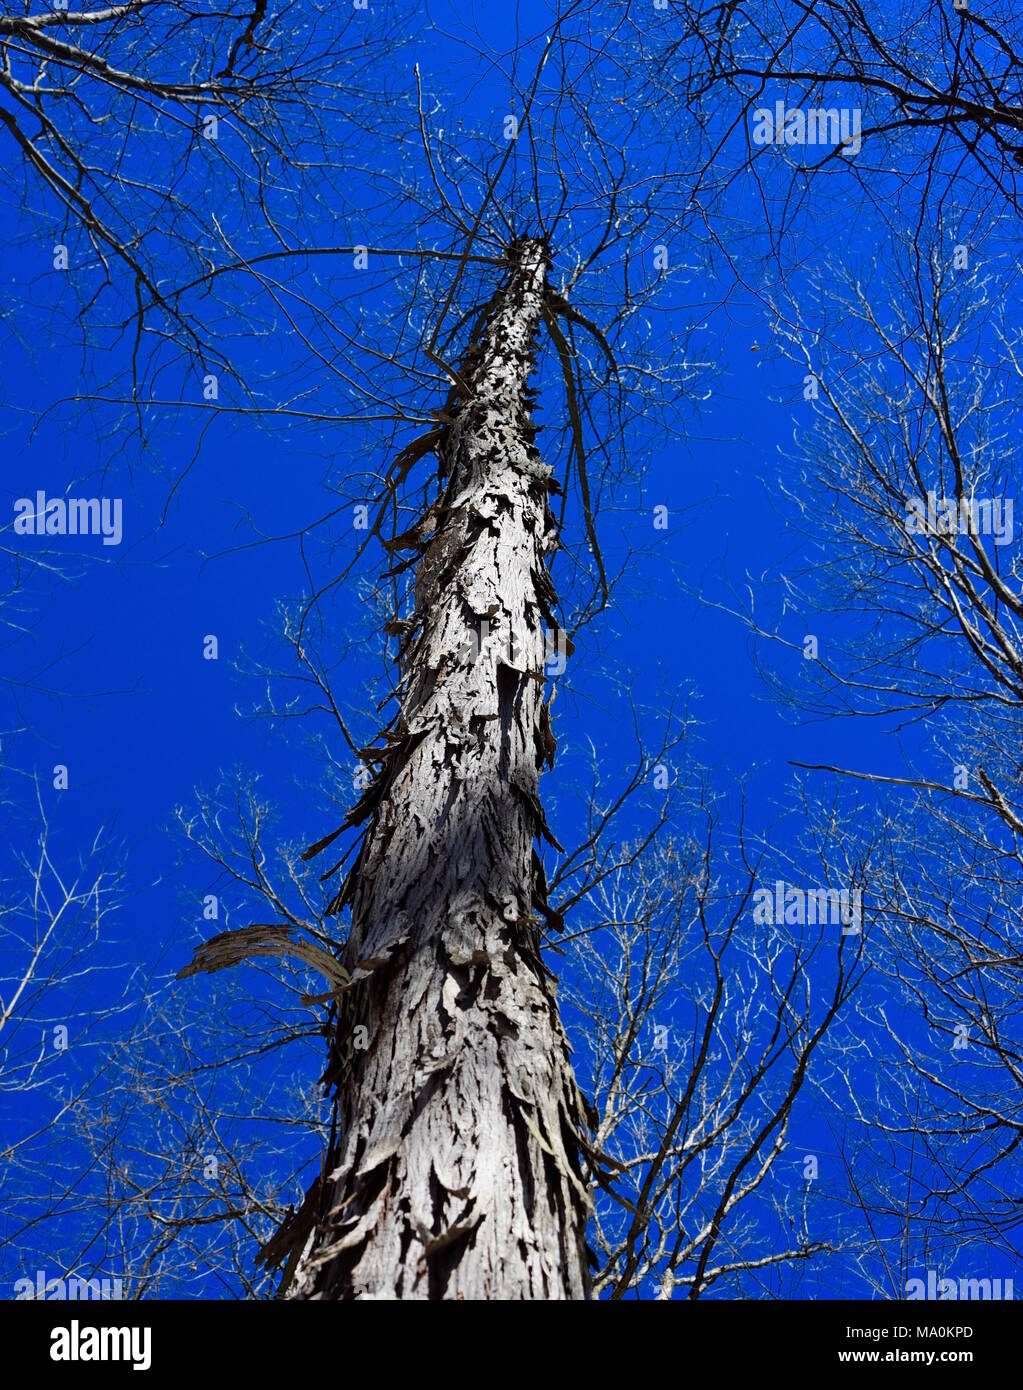 Peeling bark and branches of a shagbark hickory silhouetted against a blue sky in winter Stock Photo